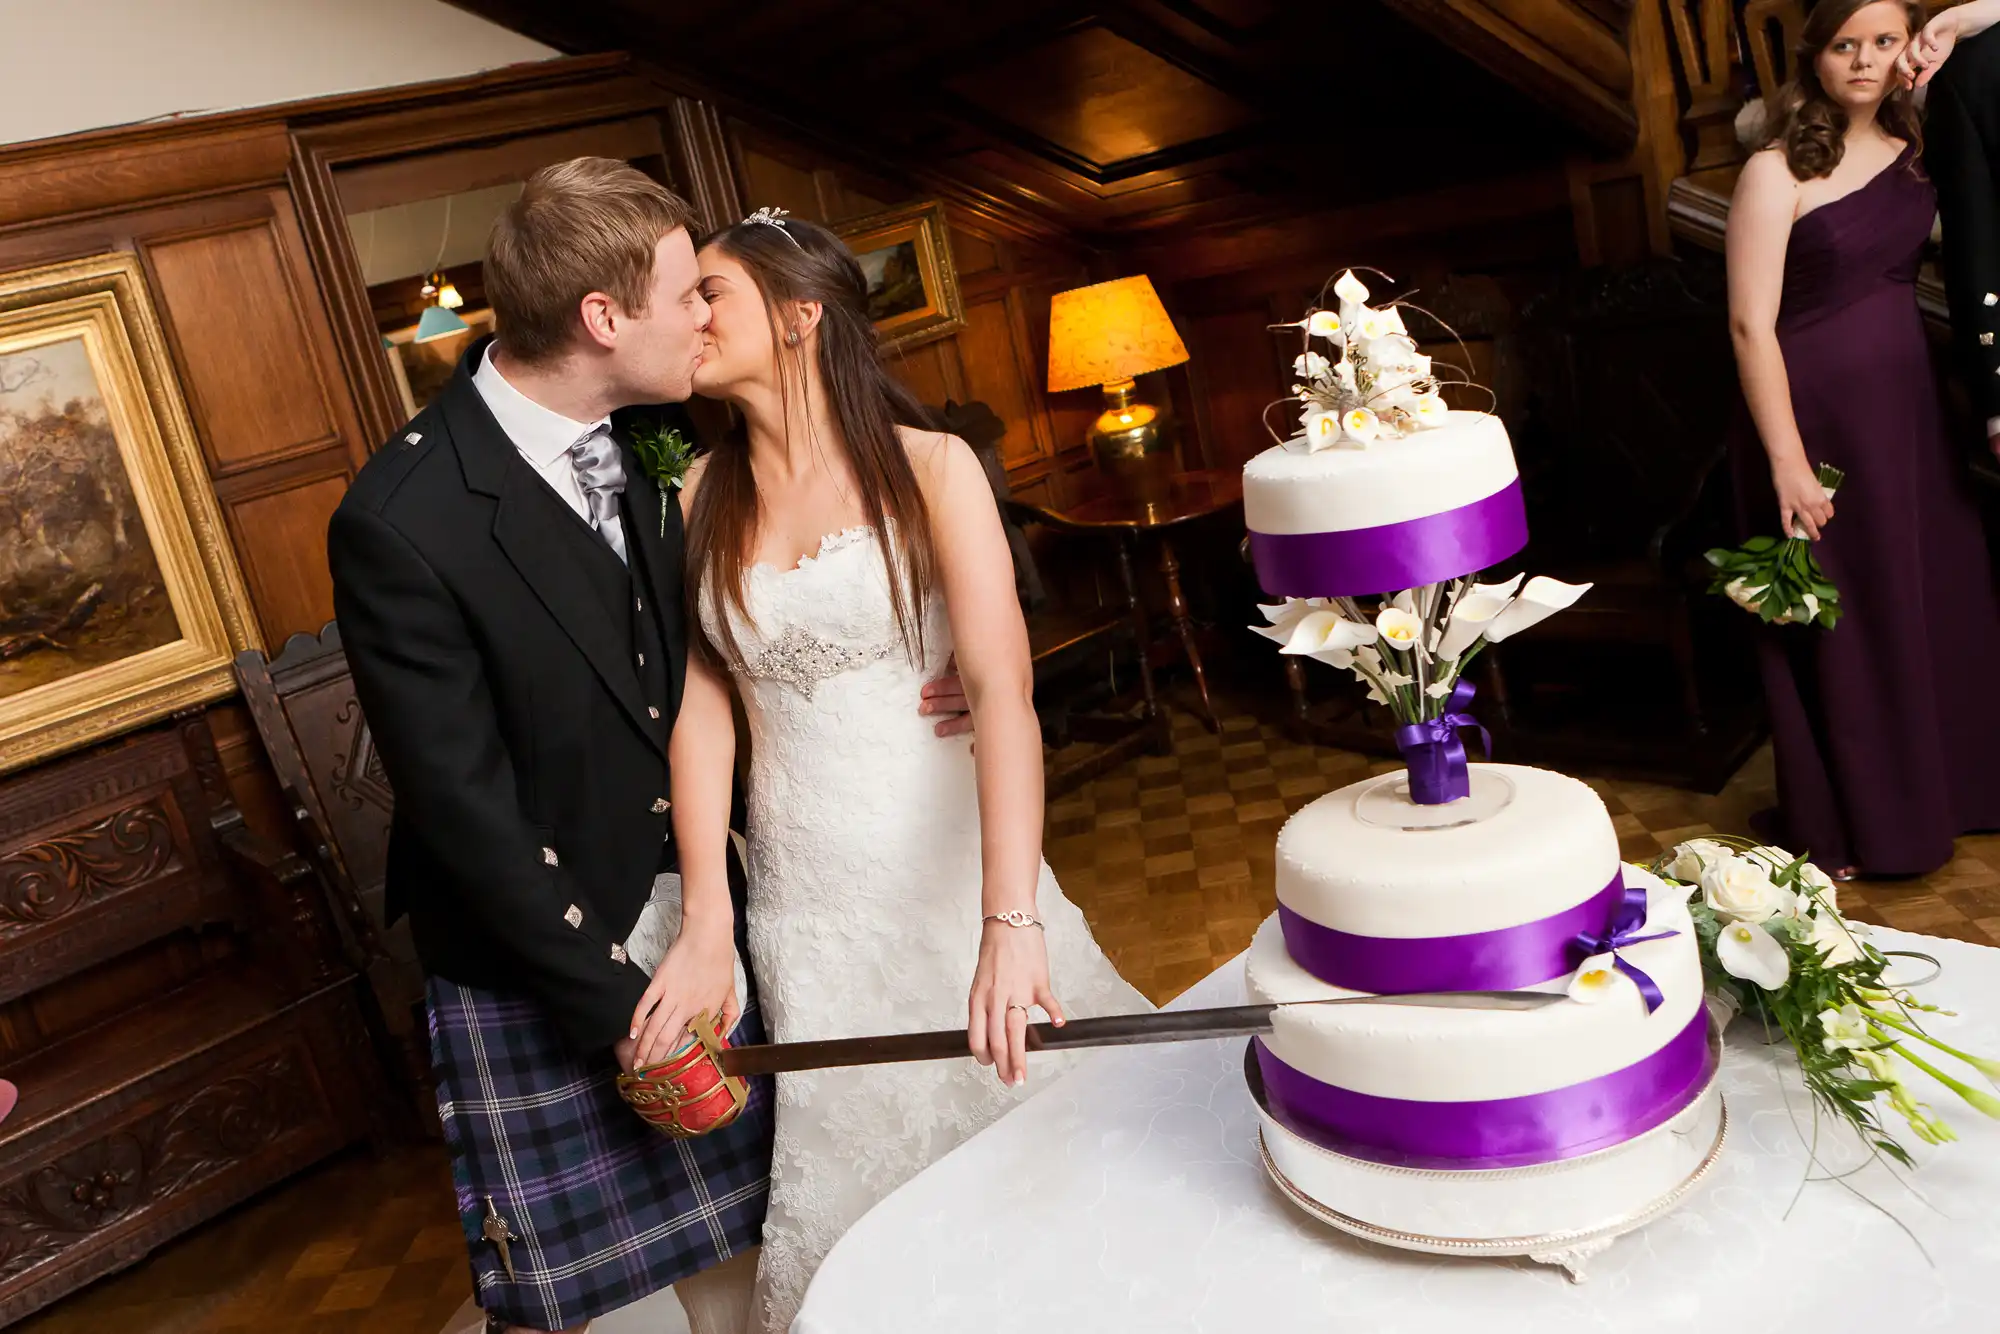 Bride and groom in wedding attire kissing beside a three-tiered white and purple cake in a warmly lit room, with a bridesmaid looking on.